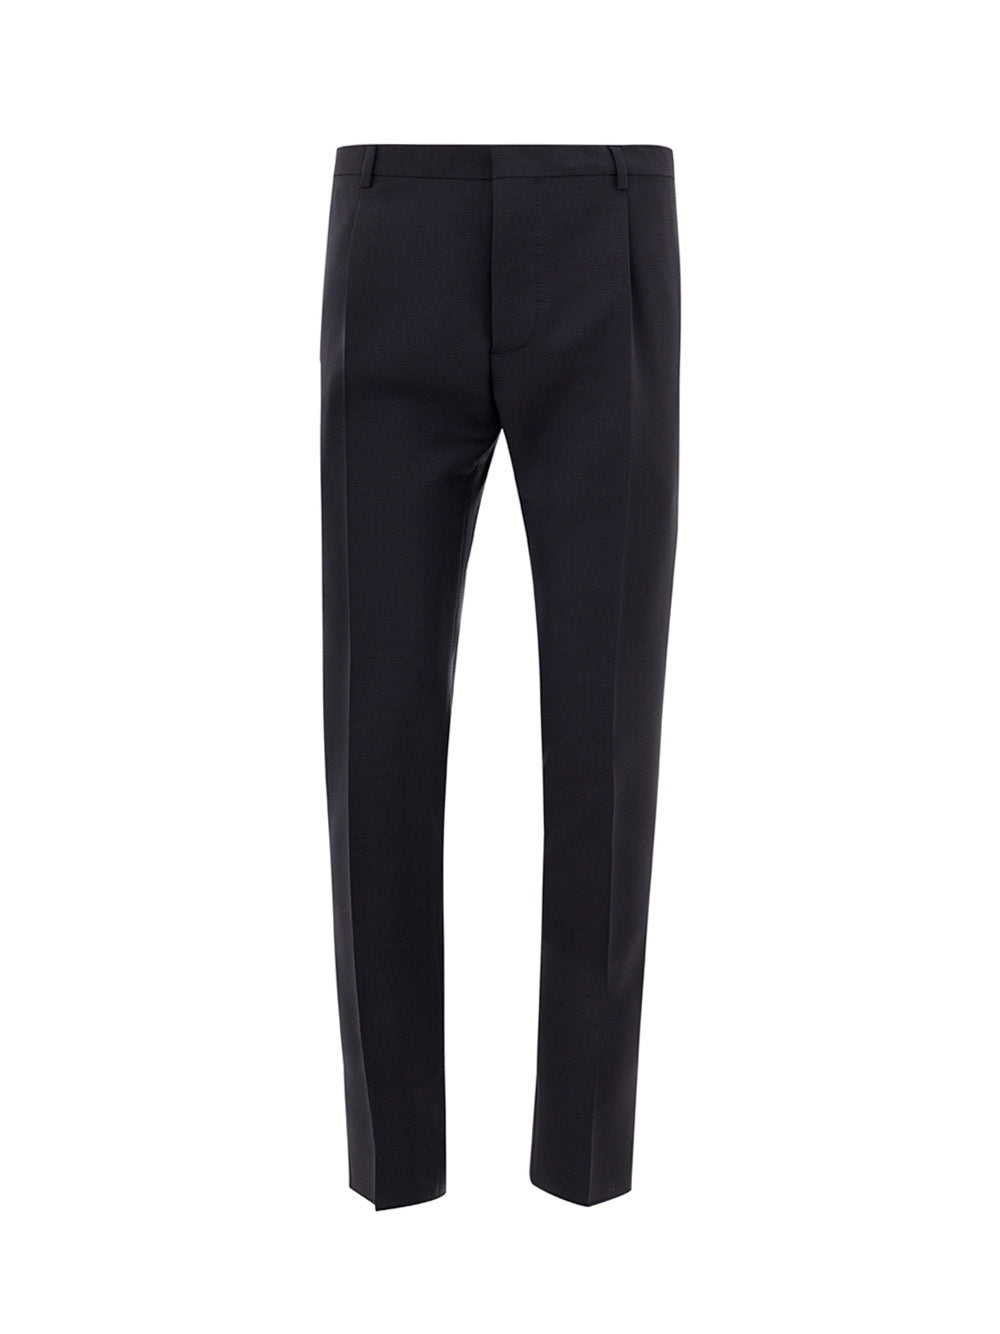 Valentino Tailored Trousers